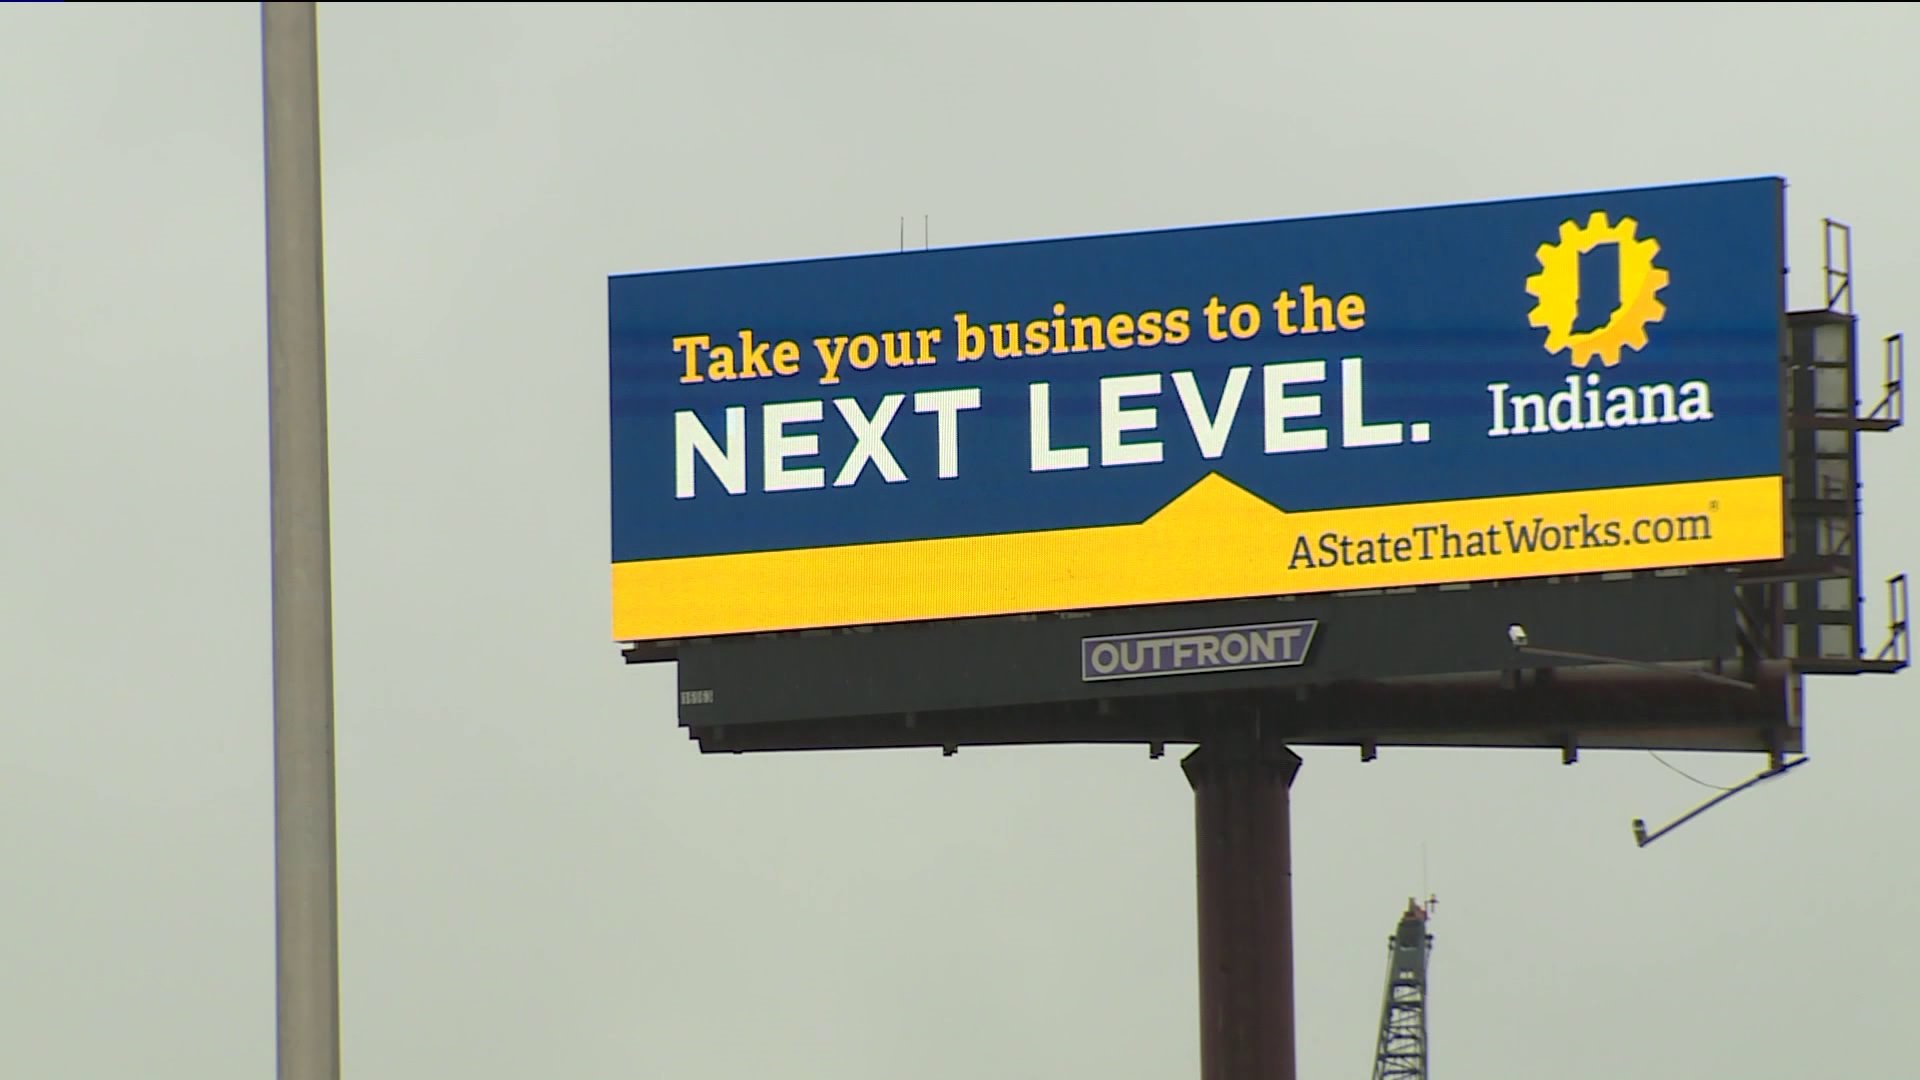 Indiana agency targets Connecticut businesses with billboards